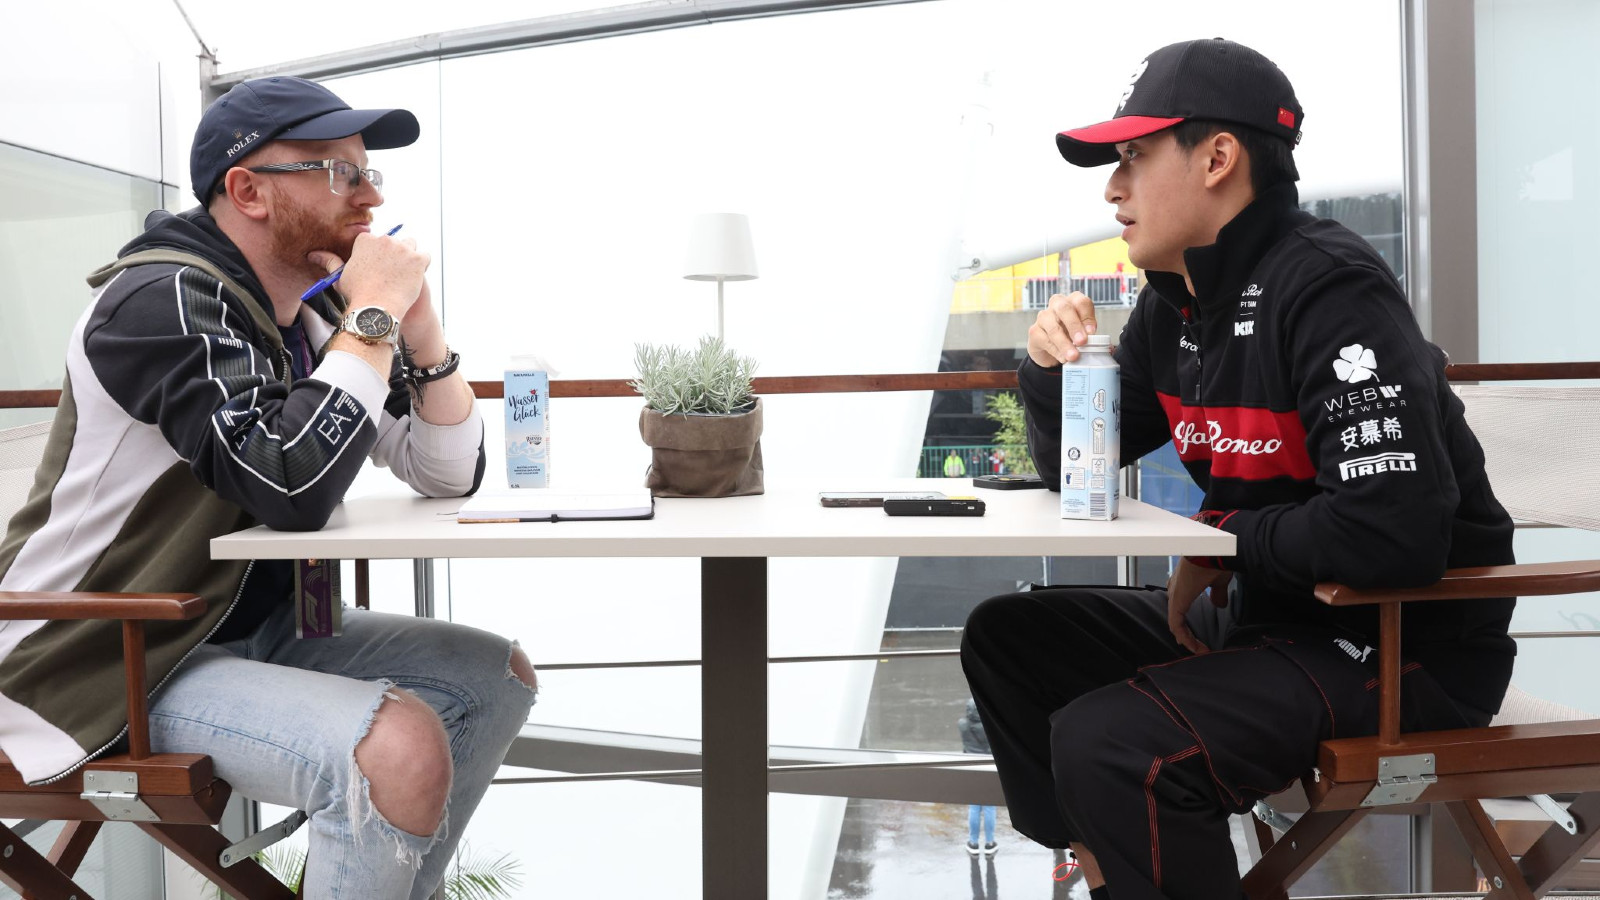 Alfa Romeo's Zhou Guanyu at the Belgian Grand Prix, speaking with PlanetF1.com's Thomas Maher